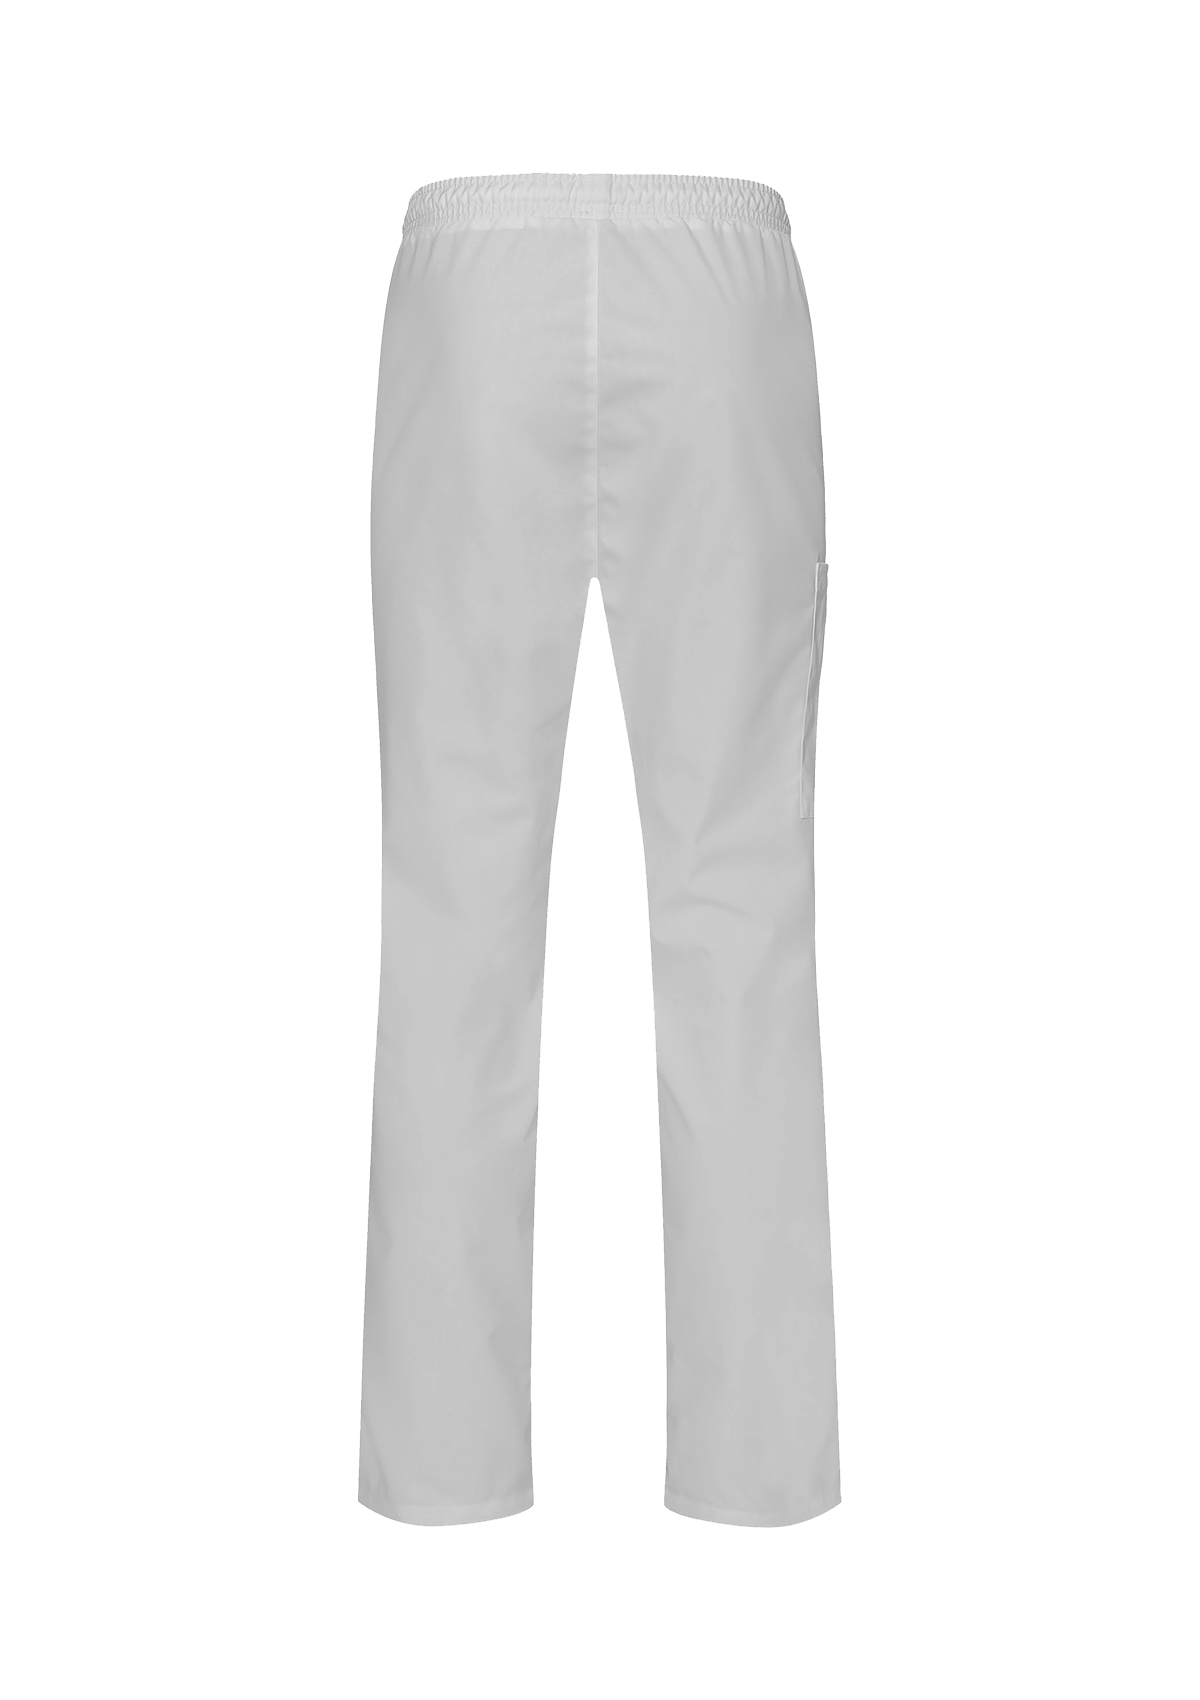 Unisex Trousers With Elasticated Waist. Segers | Cookniche